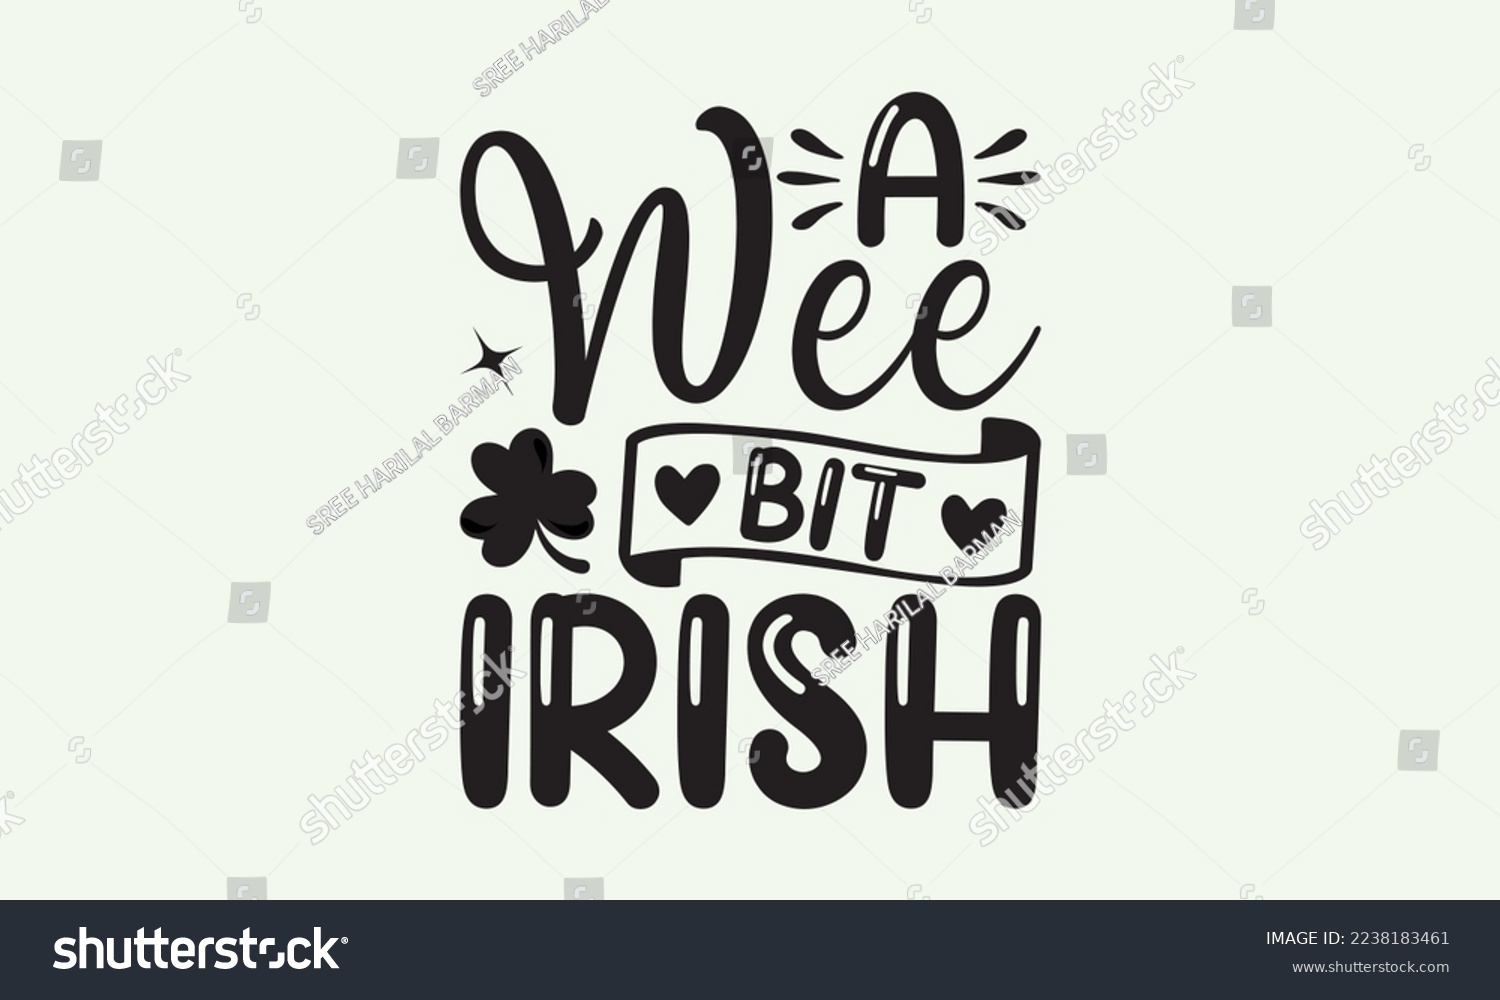 SVG of A wee bit Irish - President's day T-shirt Design, File Sports SVG Design, Sports typography t-shirt design, For stickers, Templet, mugs, etc. for Cutting, cards, and flyers. svg